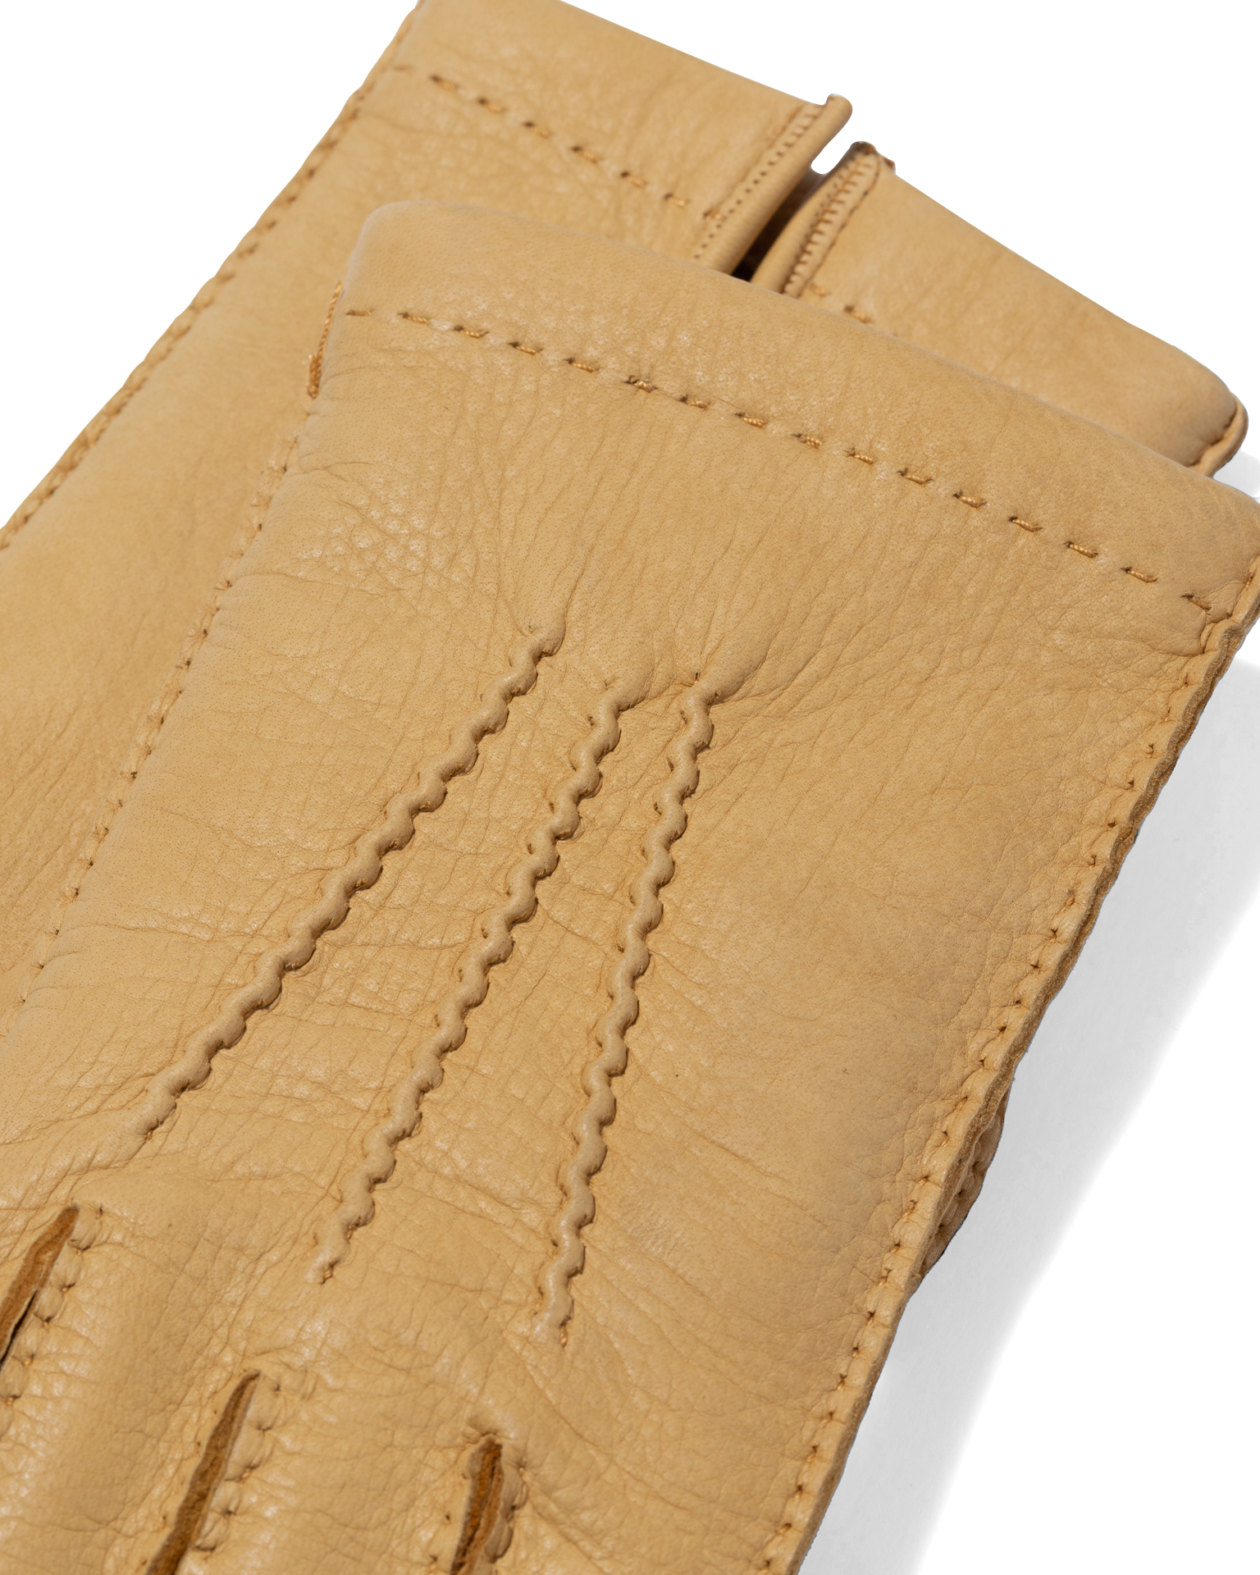 Deer Leather Gloves Yellow